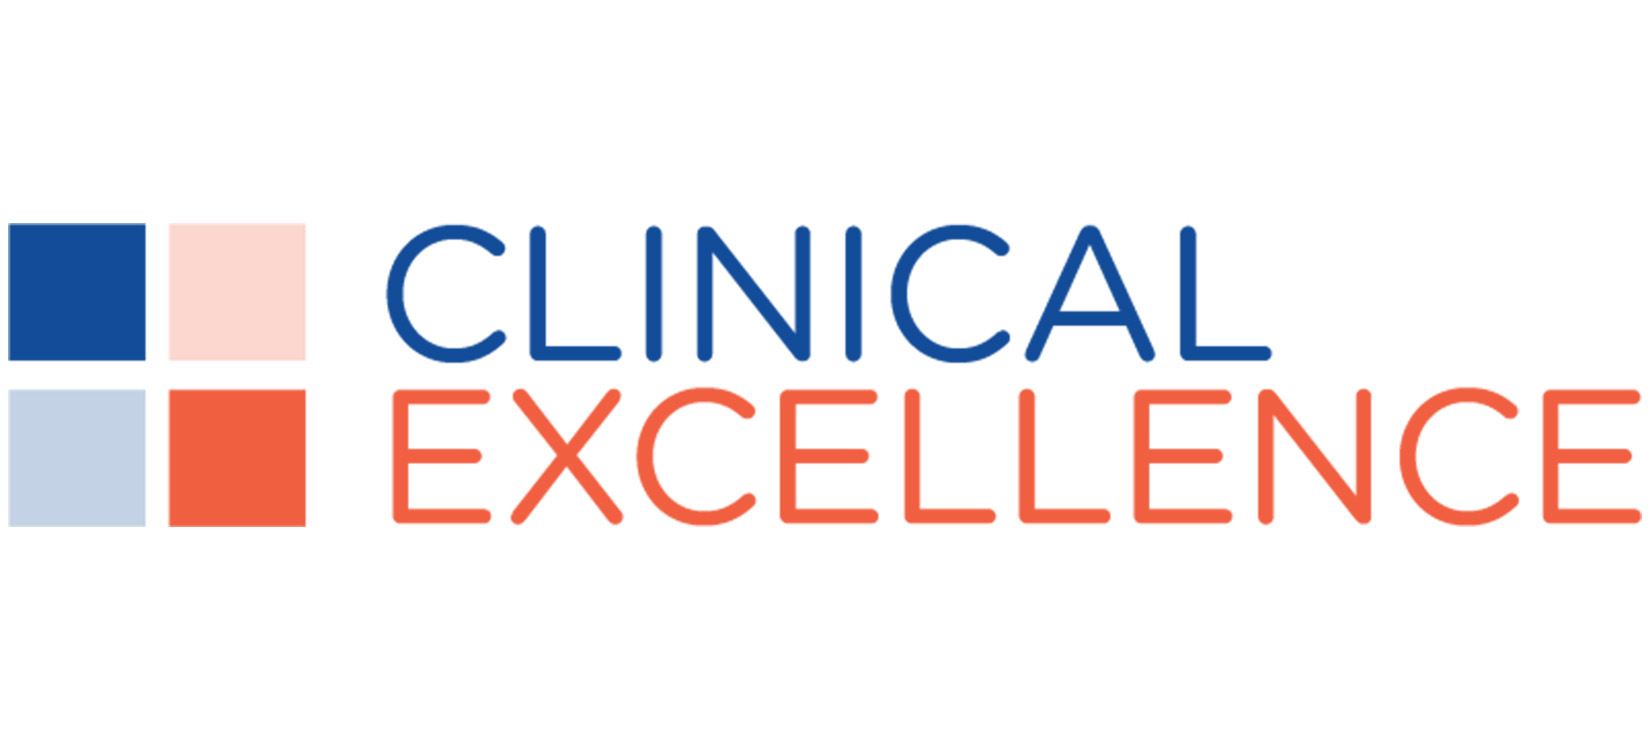 HHE Clinical Excellence continues to grow